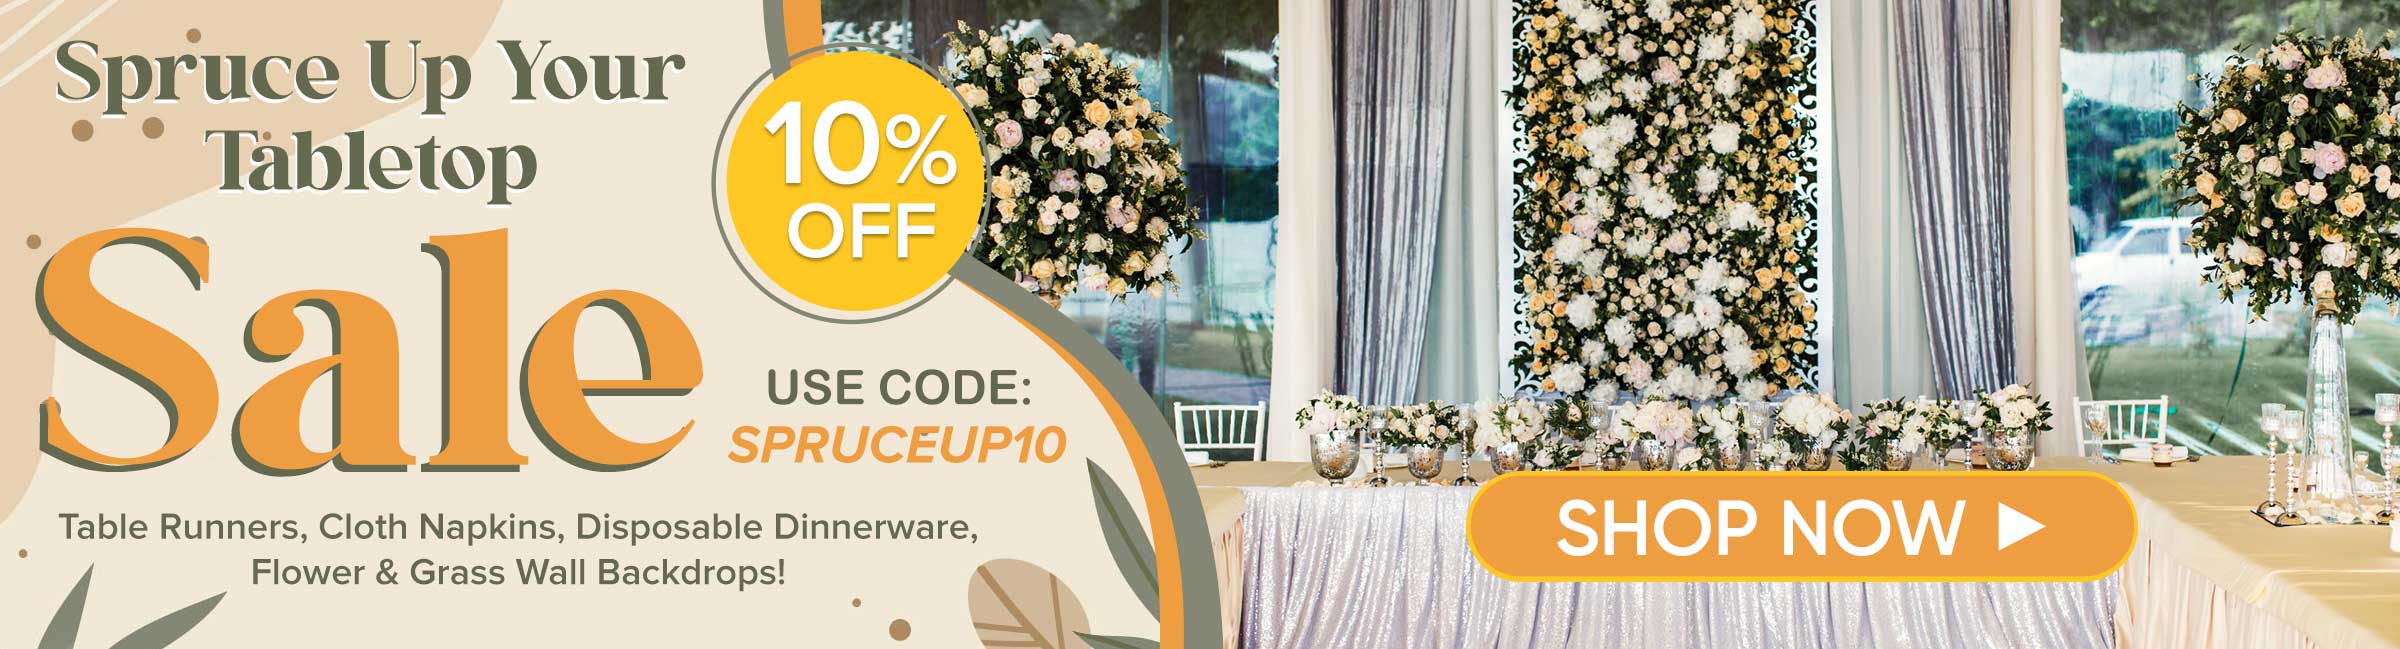 10% Off Table Runners, Cloth Napkins, Disposable Dinnerware, Flower & Grass Wall Backdrops!